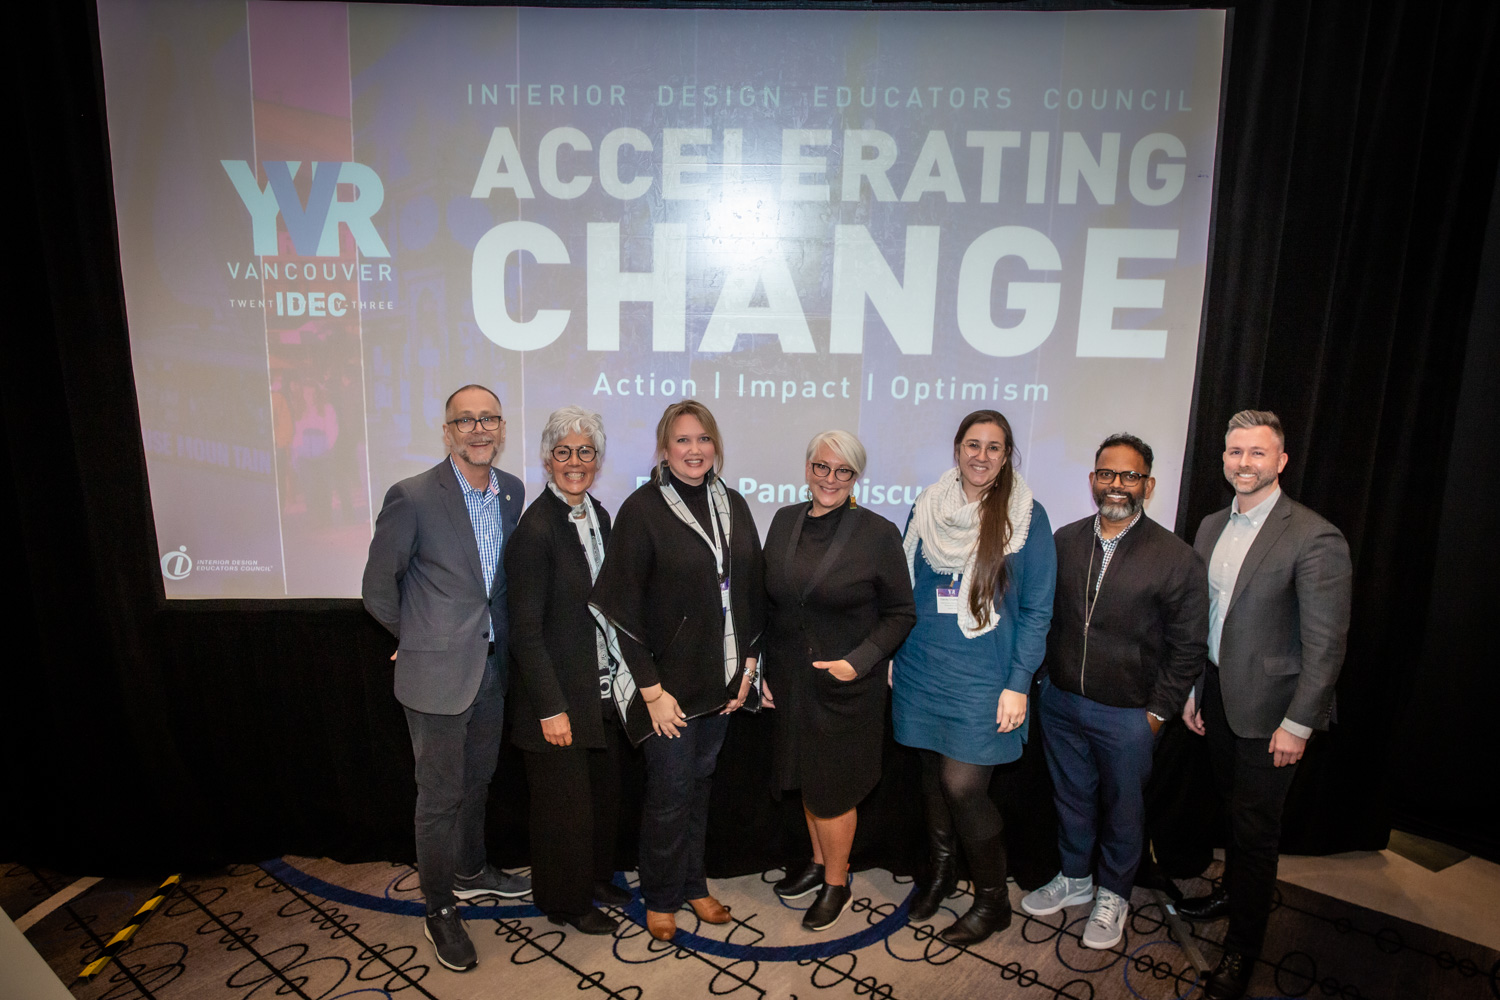 Accelerating Change conference panelists standing in front of projector screen/